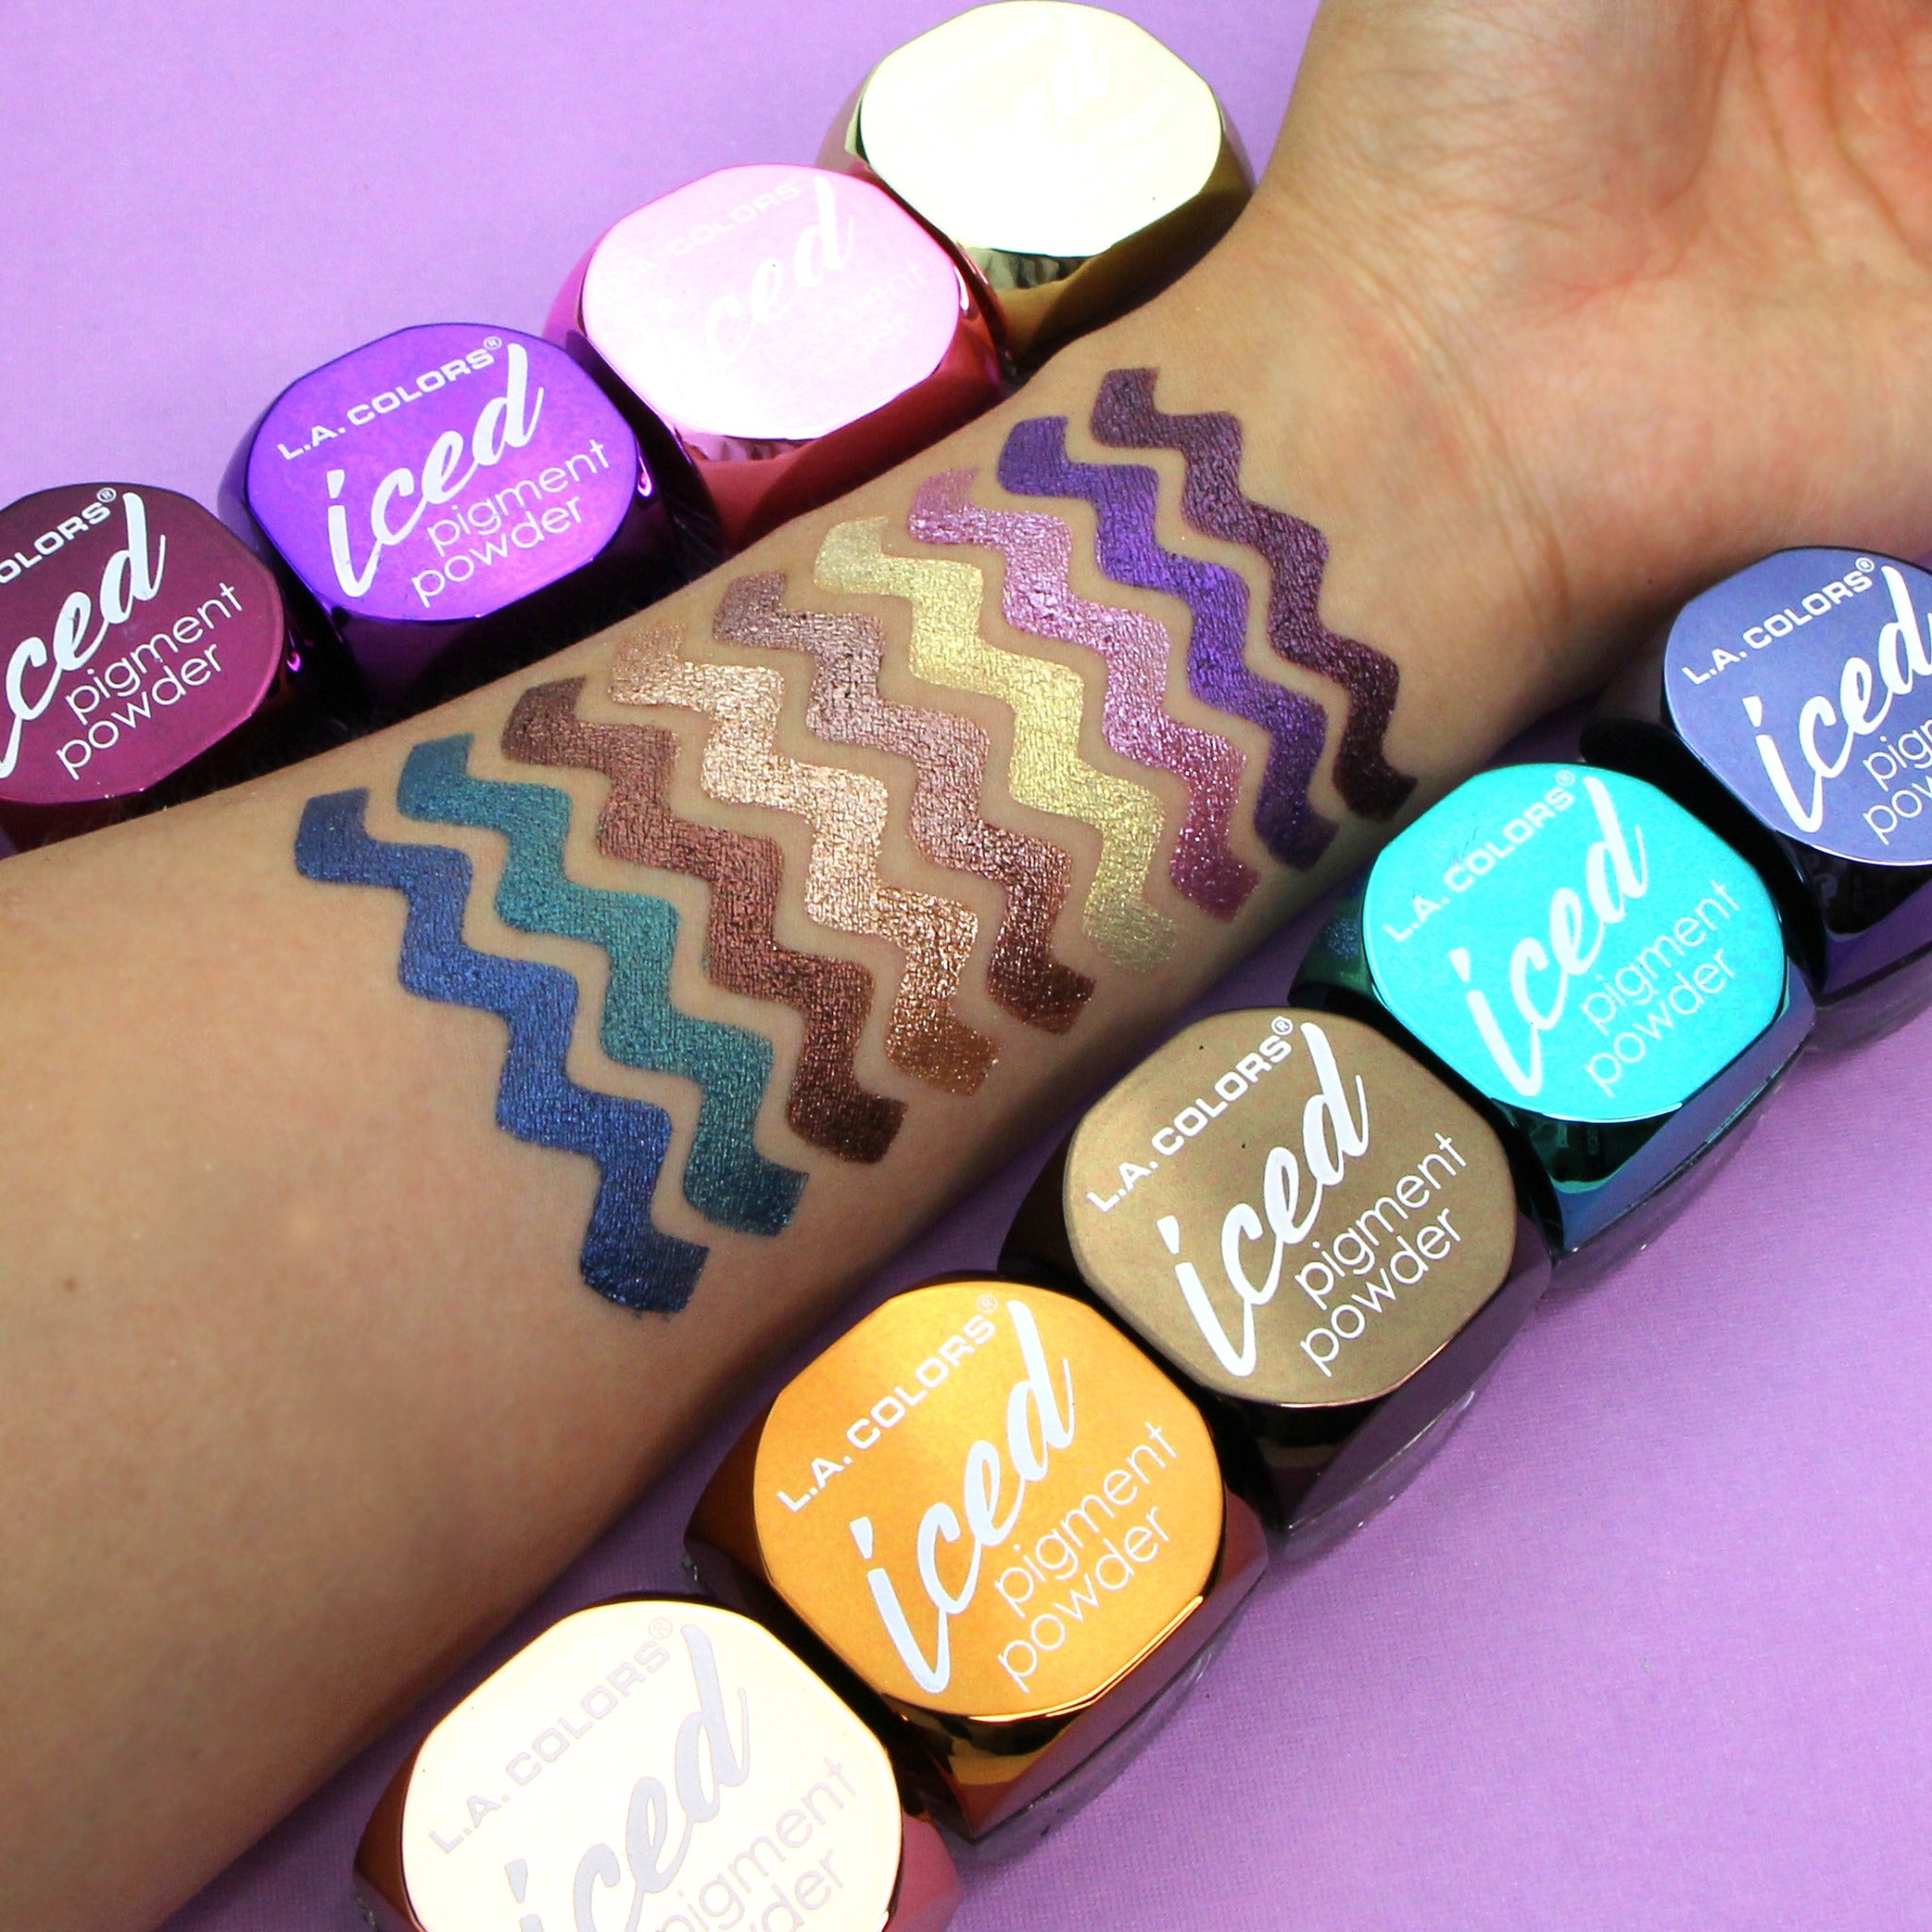 L.A. Colors Iced Pigment Powder - Glowing